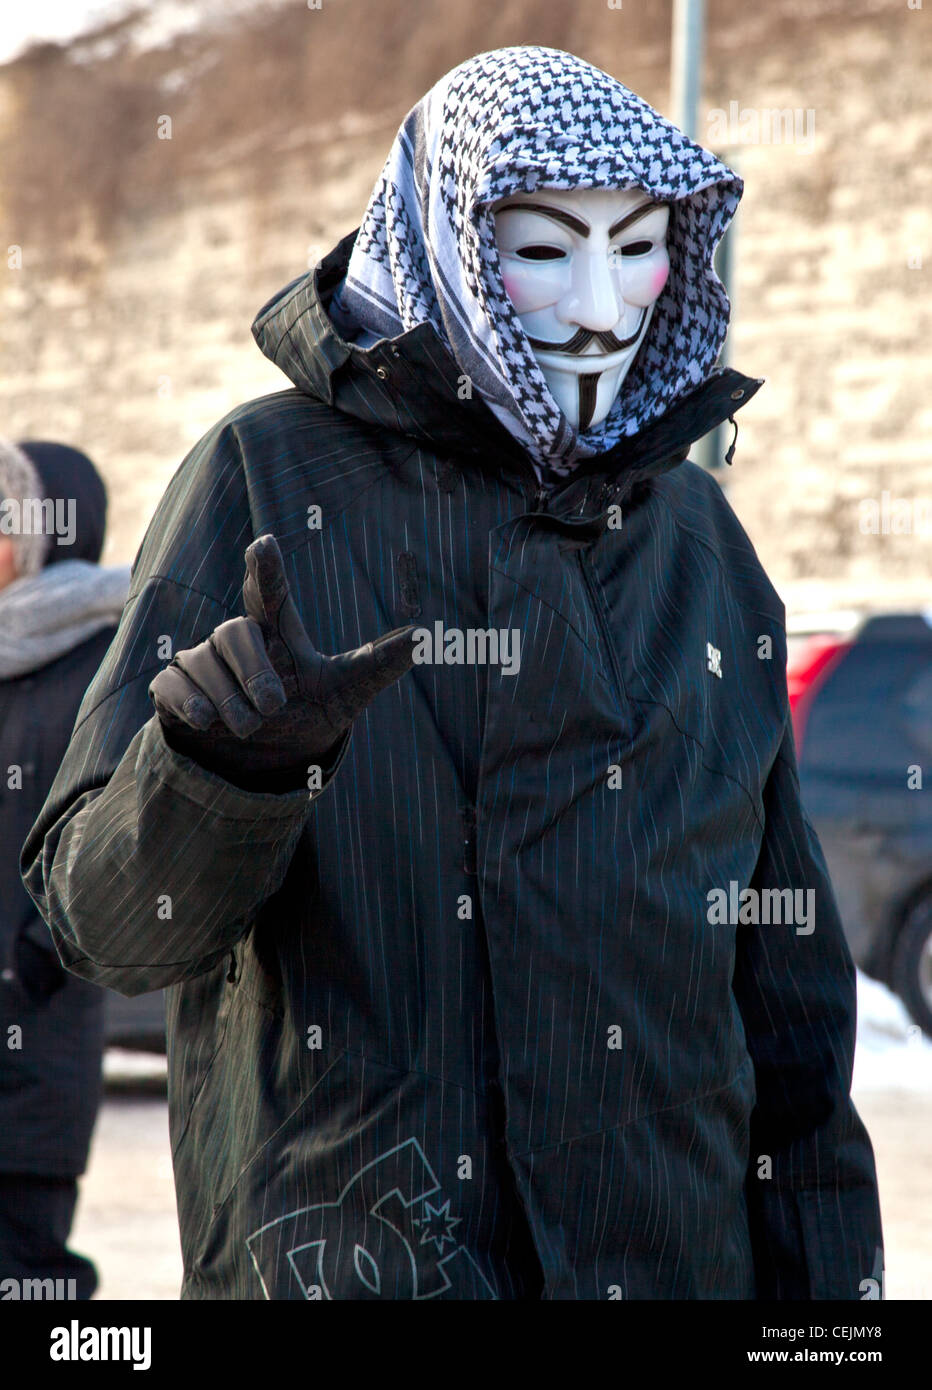 Man posing for the camera wearing a Guy Fawkes mask at the anti-ACTA protest in Tallinn, Estonia Stock Photo